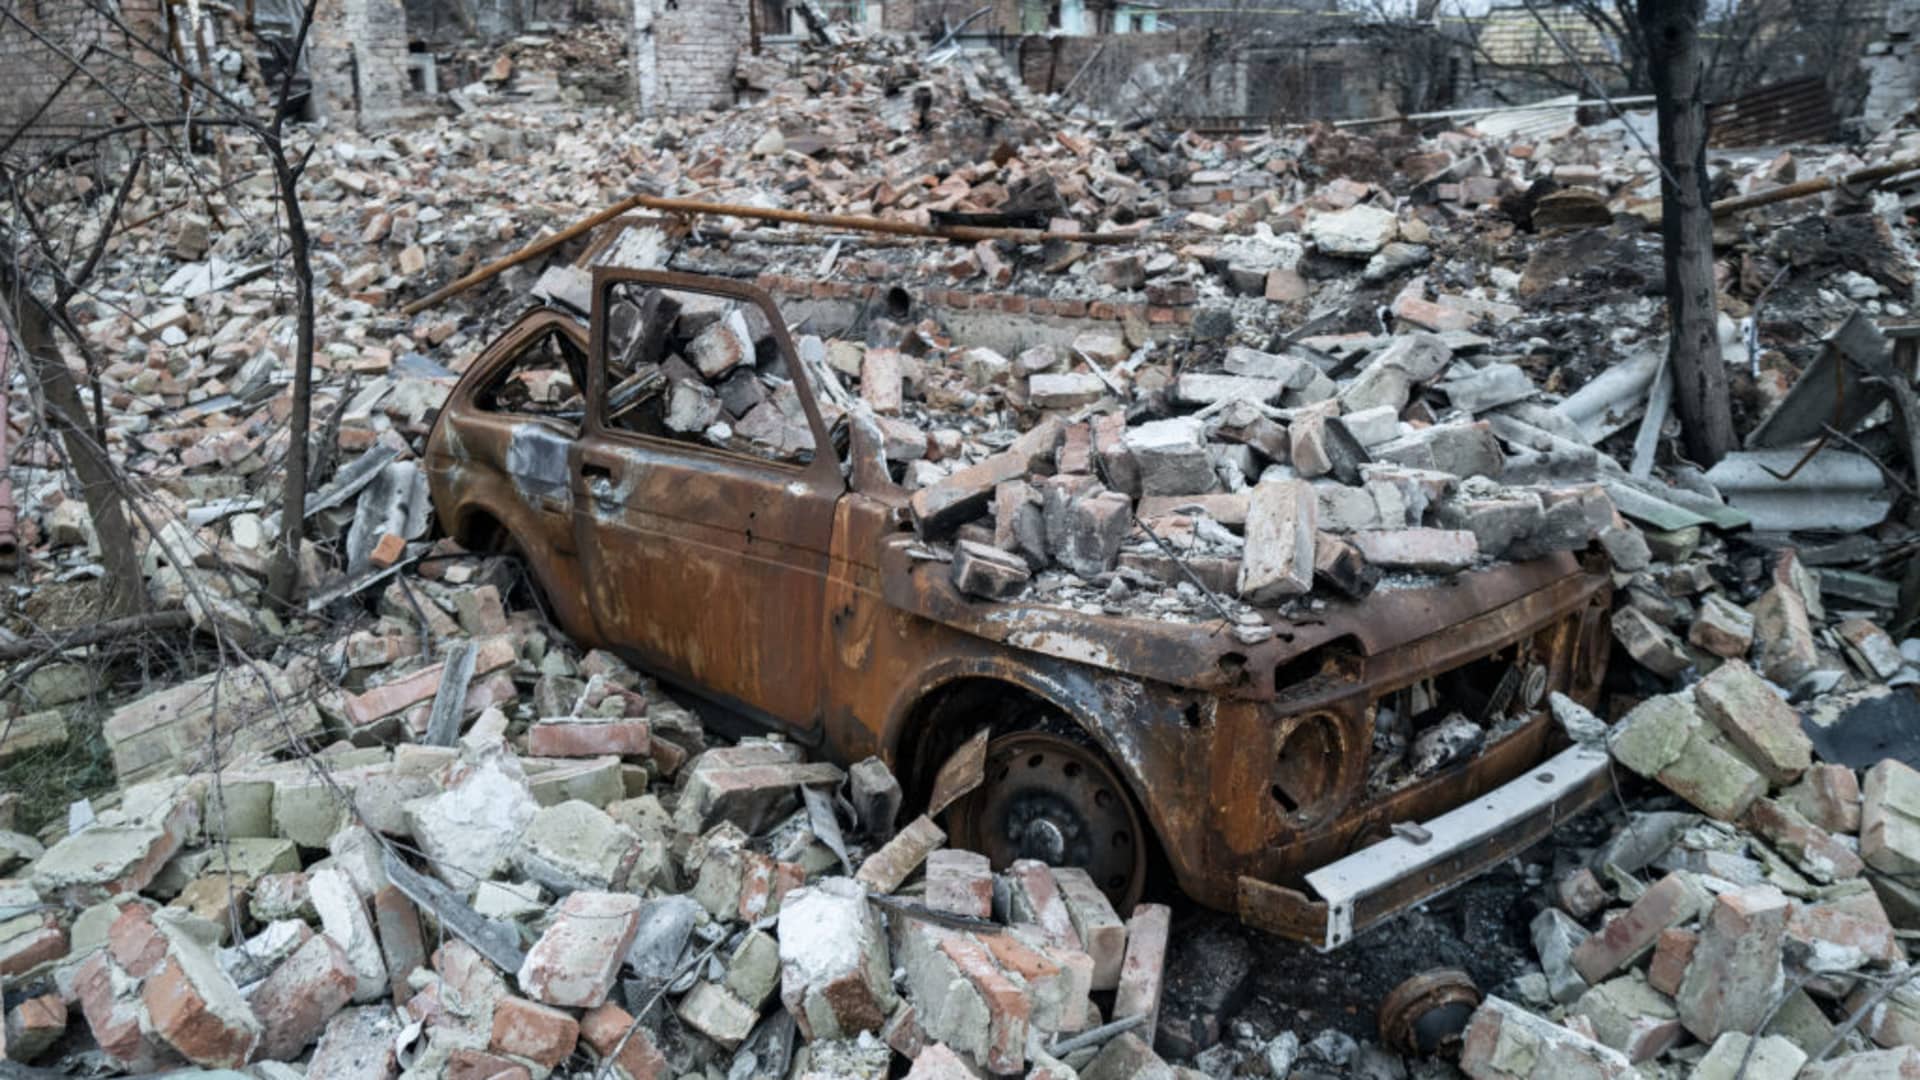 A damaged car and pile of debris are seen as the Russia-Ukraine War continues in Bakhmut, Ukraine on January 28, 2023.